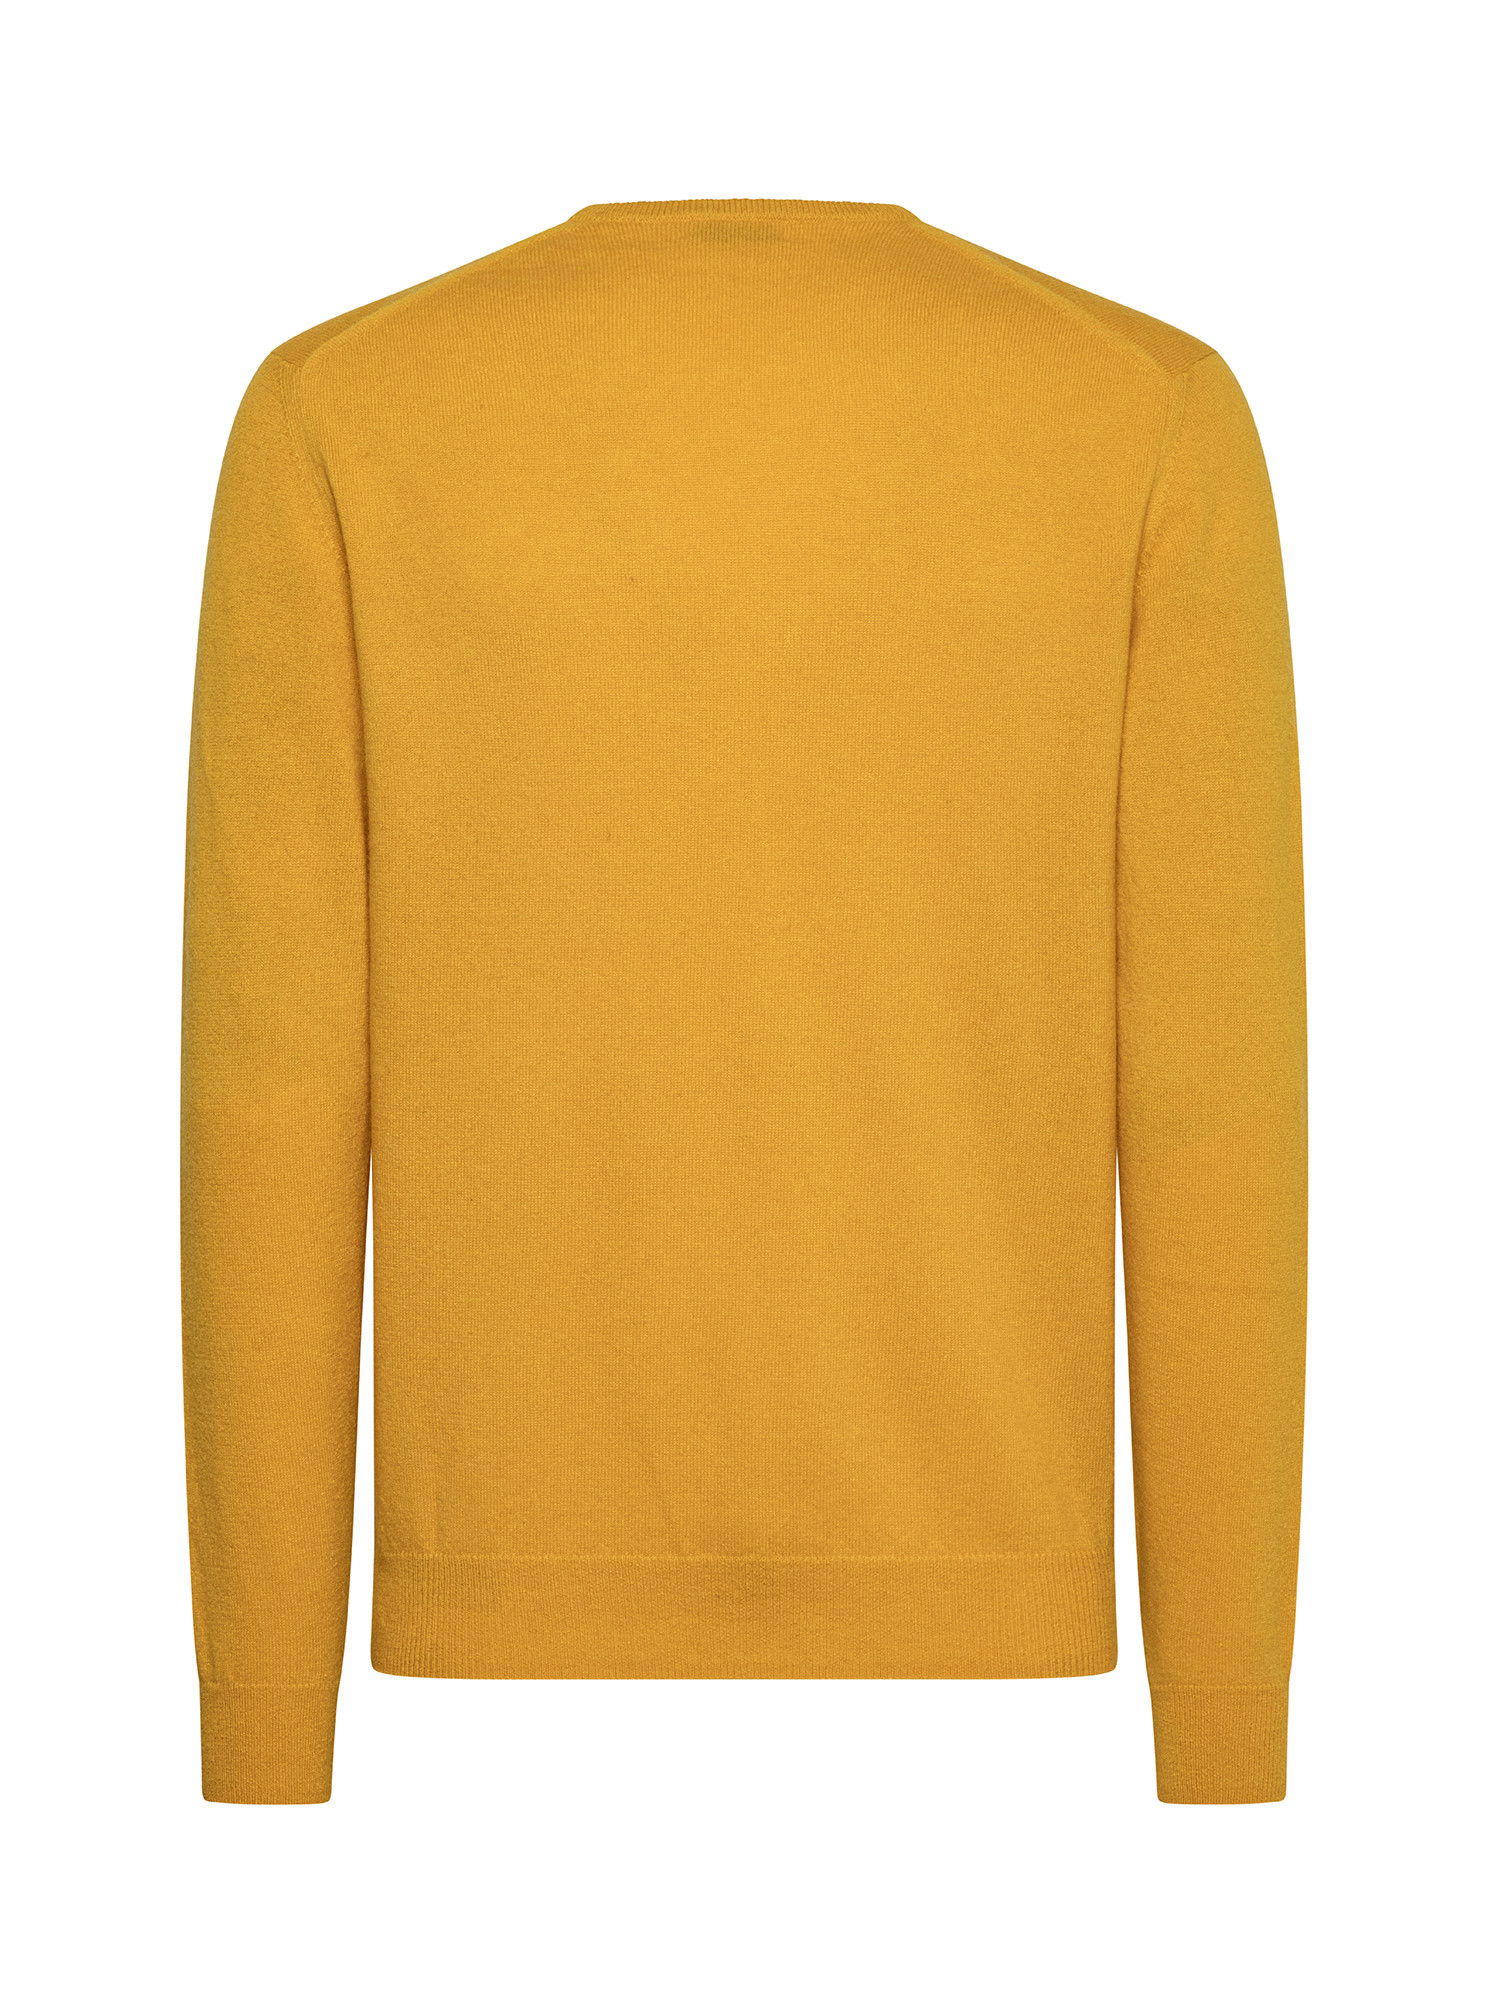 Pure cashmere crewneck pullover, Yellow, large image number 1